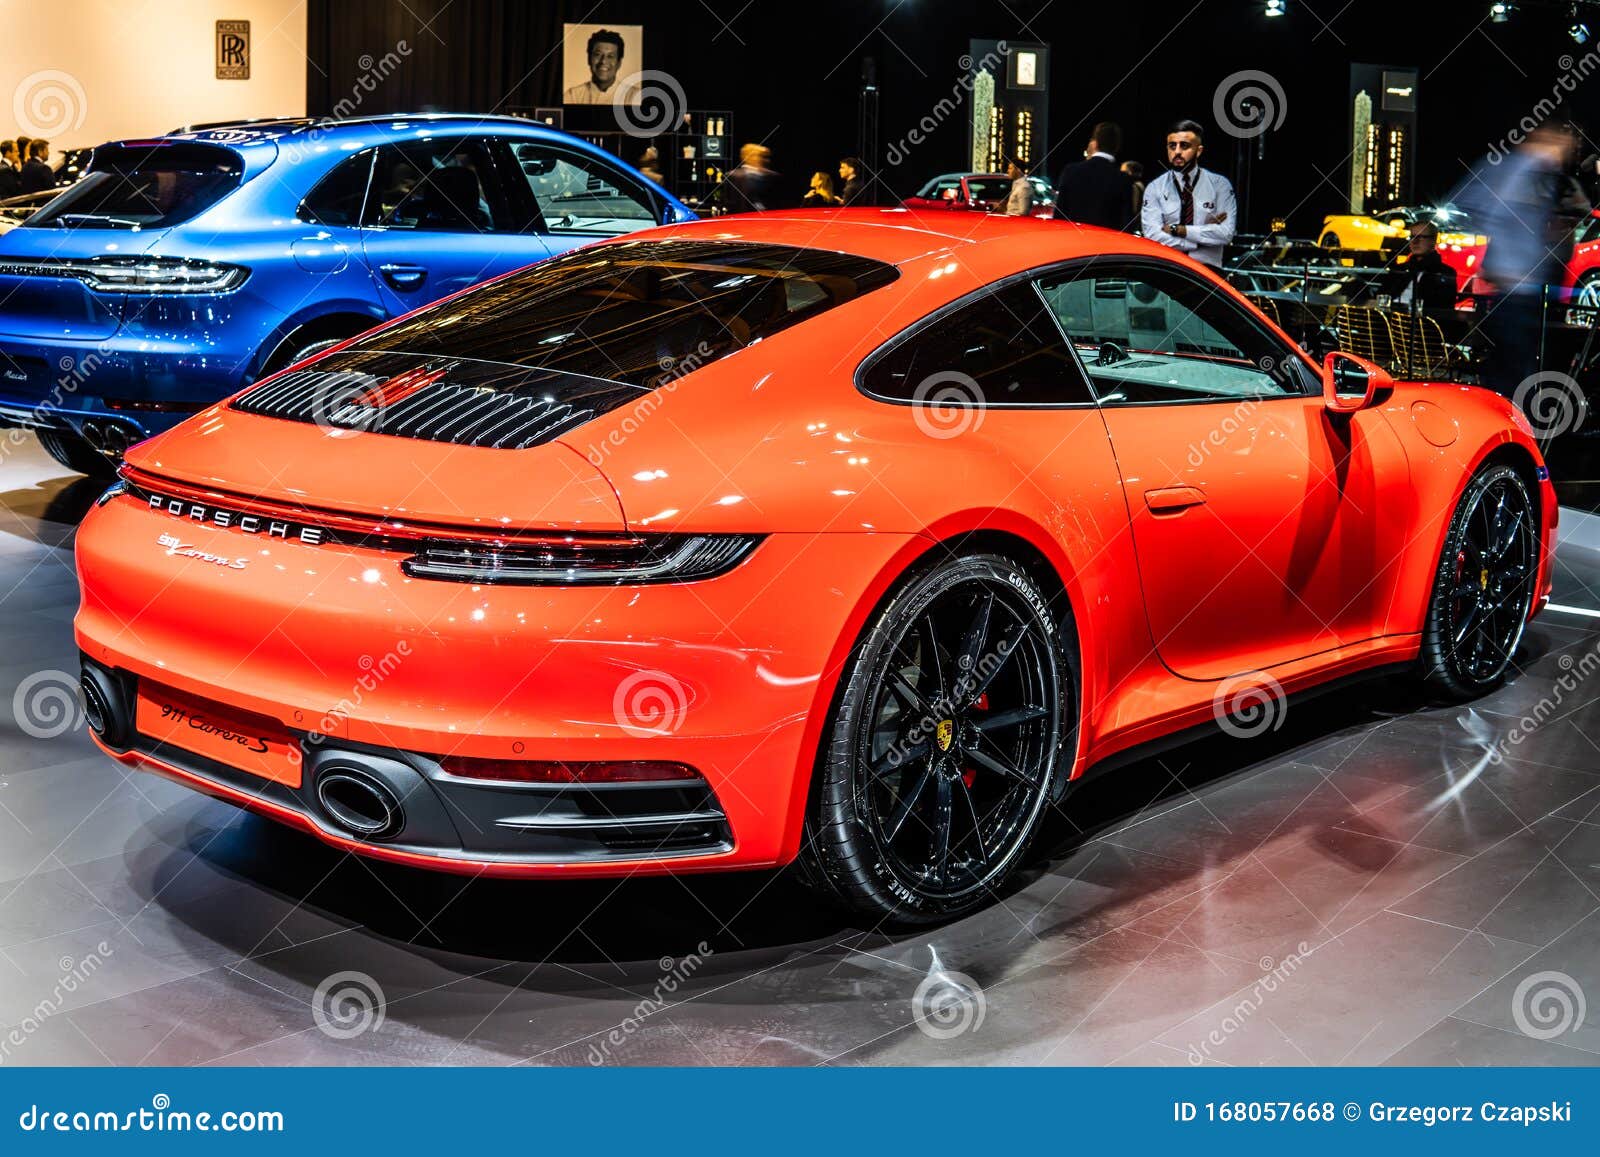 Red All New Porsche 911 Carrera S Eighth-generation at Brussels Motor Show,  992 Series, Supersport Car Built by Porsche Editorial Stock Photo - Image  of european, belgium: 168057668